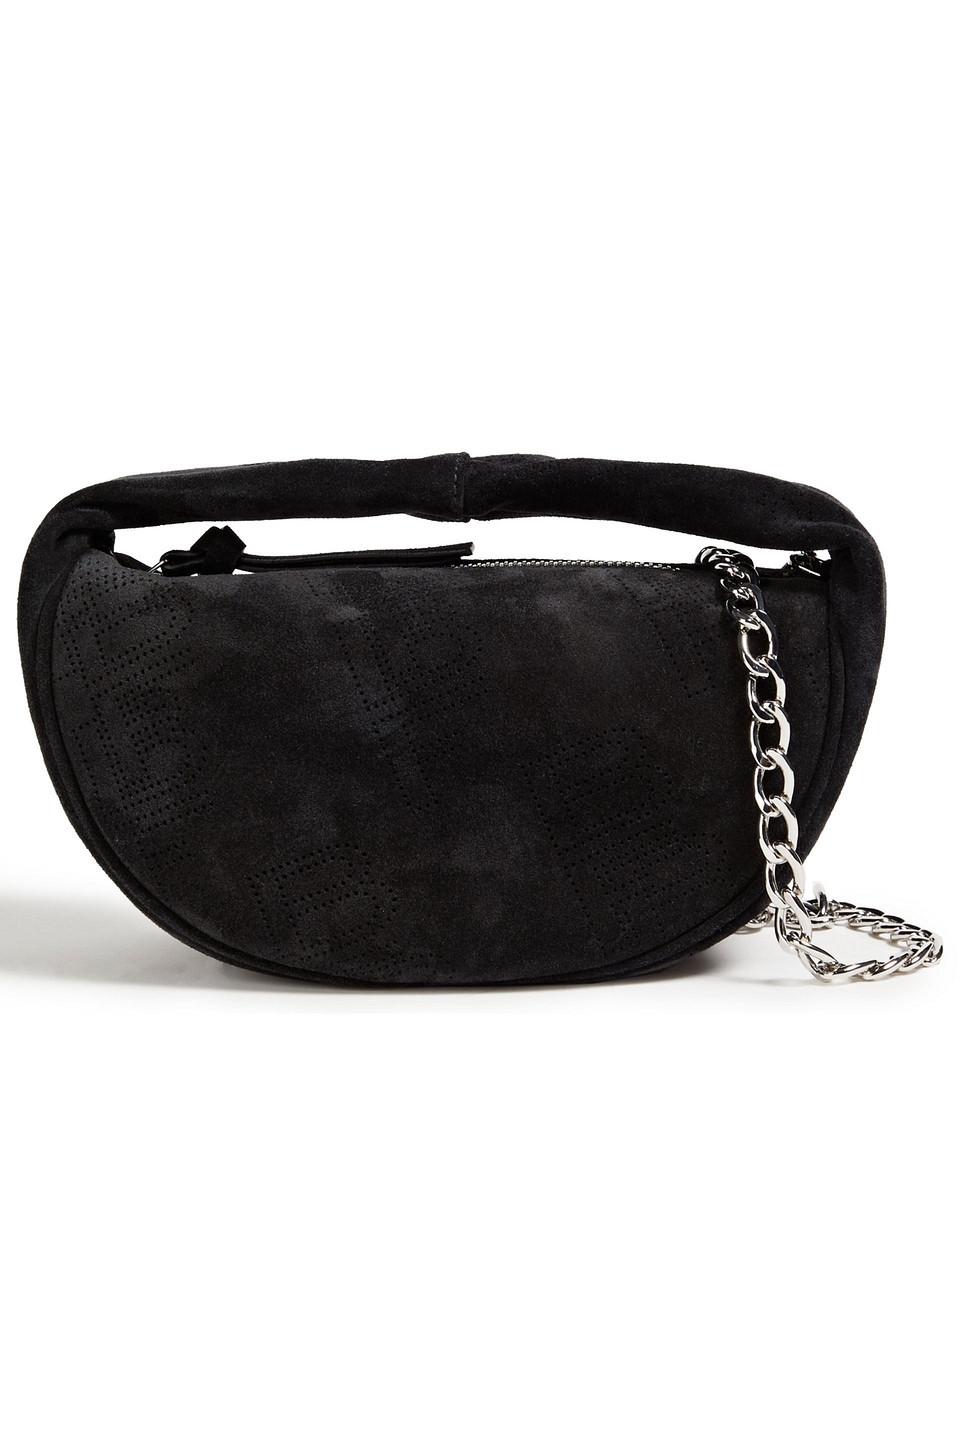 BY FAR Baby Cush Perforated Suede Shoulder Bag in Black | Lyst Australia